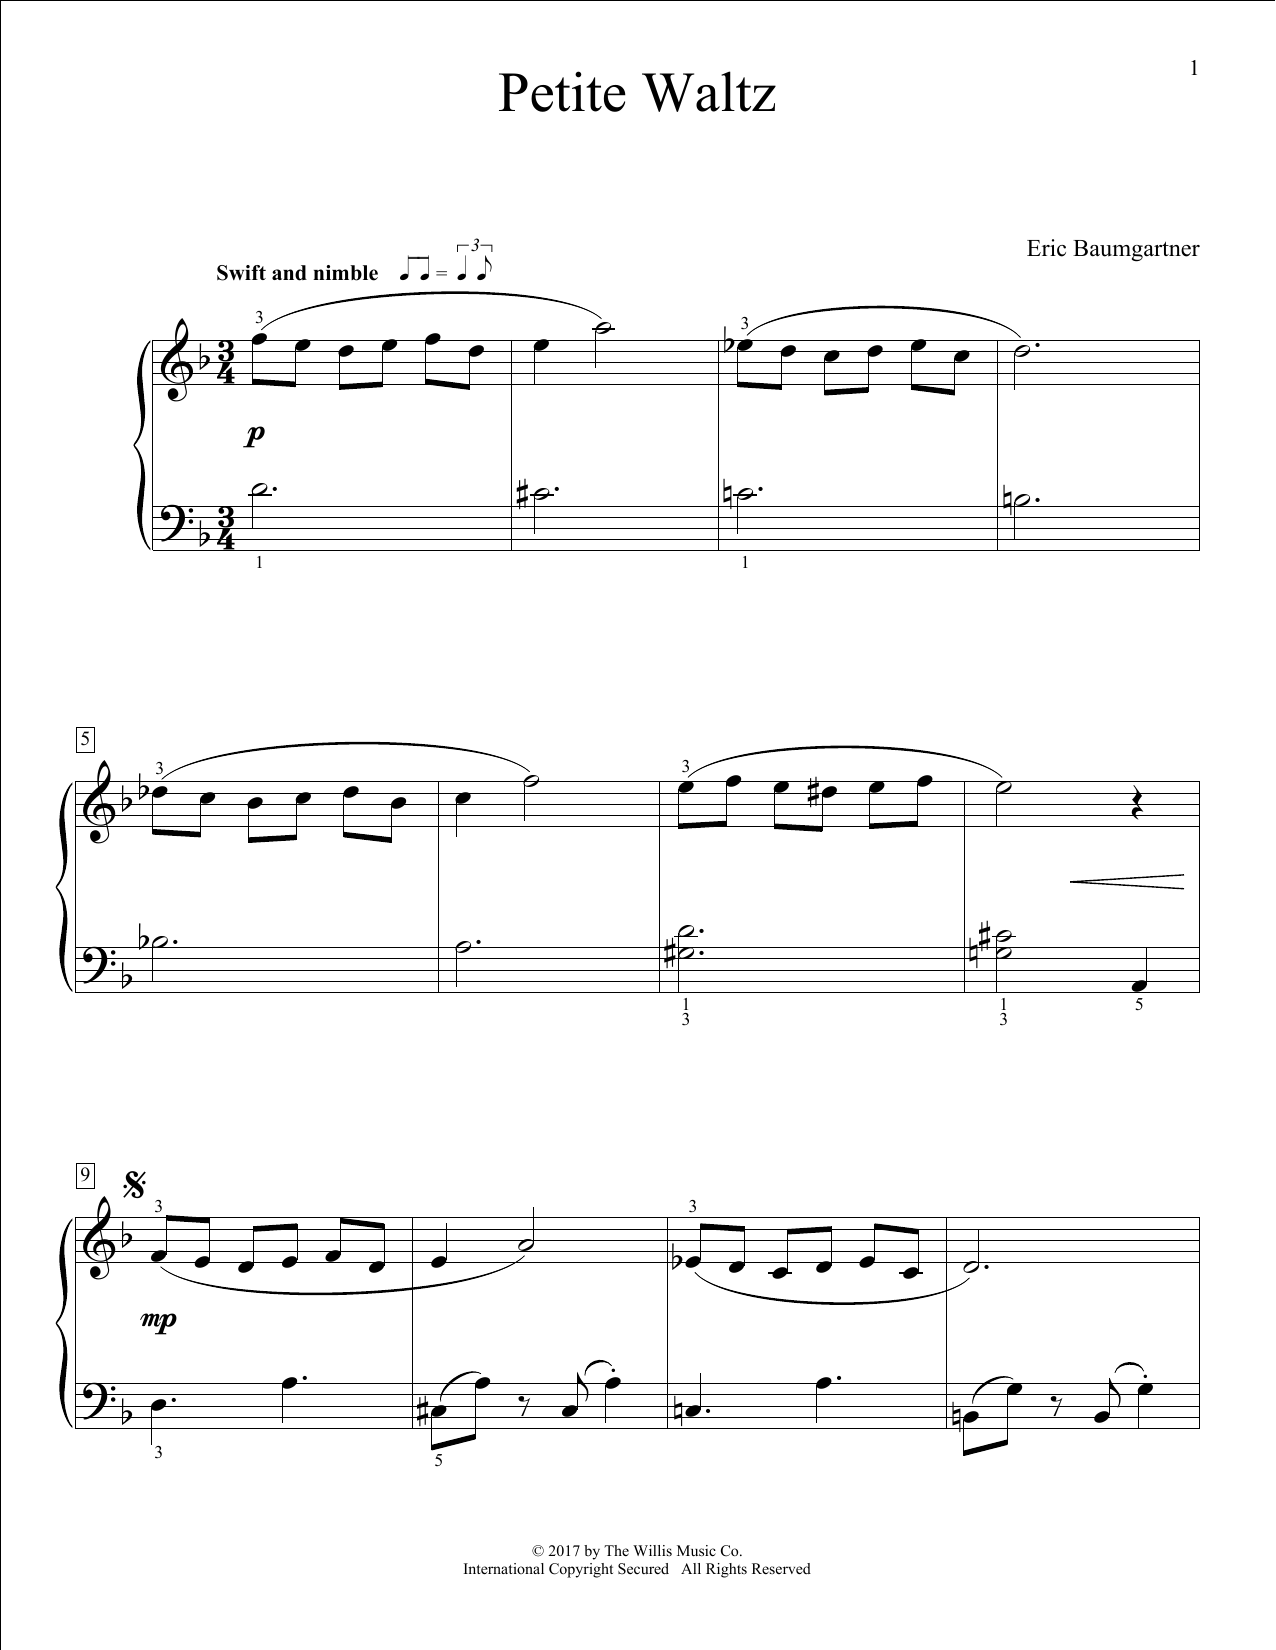 Eric Baumgartner Petite Waltz sheet music preview music notes and score for Educational Piano including 2 page(s)